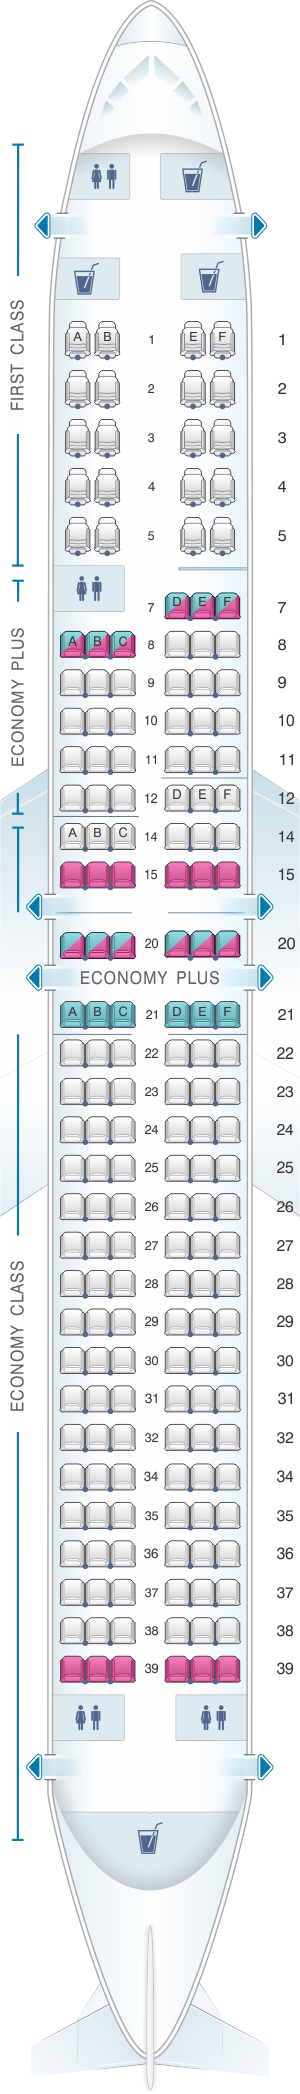 Seat map for United Airlines Boeing B737 900 - version 2